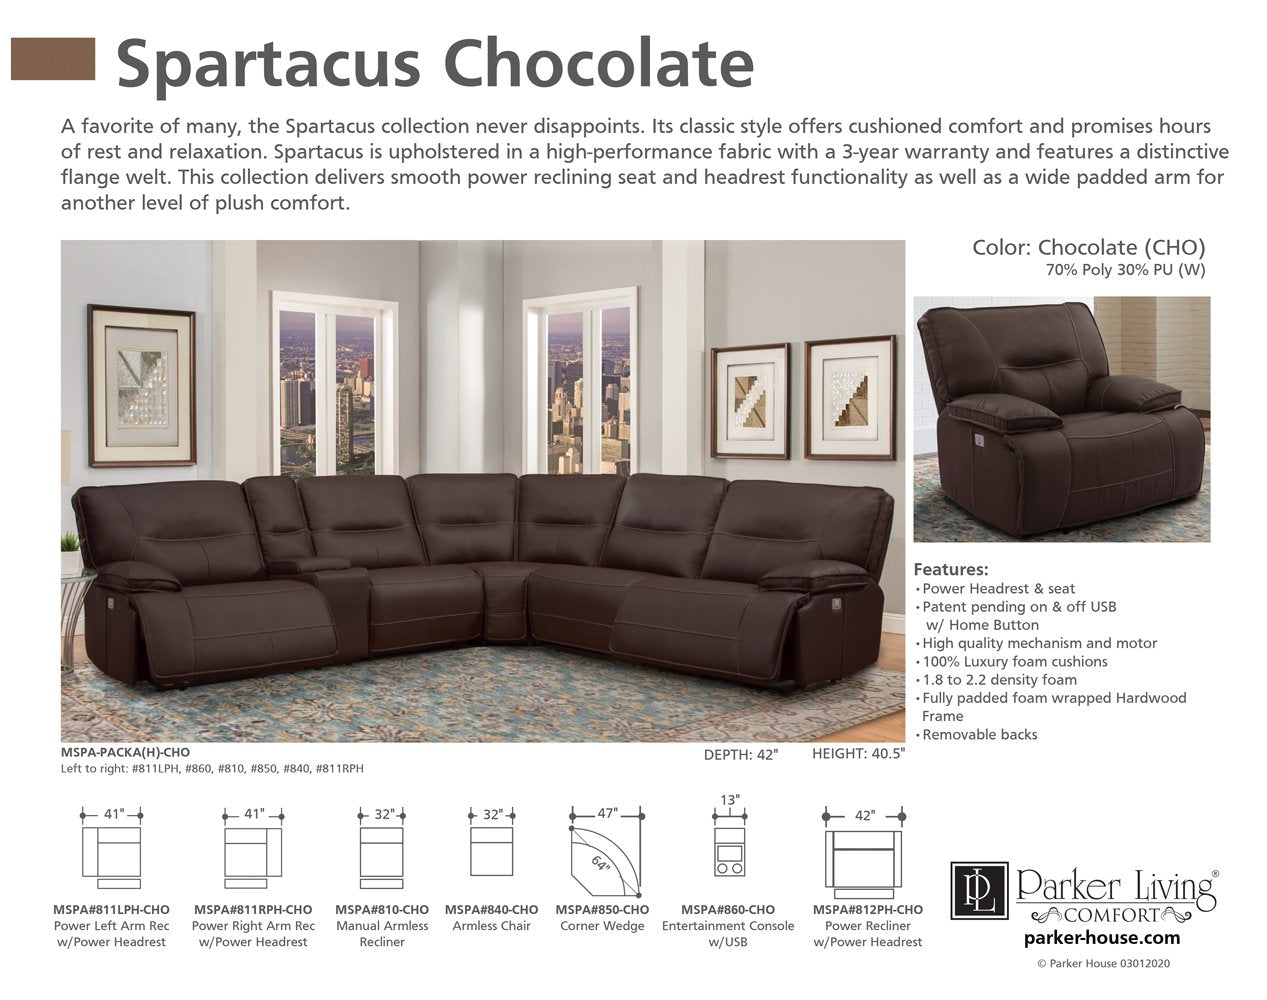 SPARTACUS - CHOCOLATE 6PC PACKAGE A (811LPH, 810, 850, 840, 860, 811RPH)